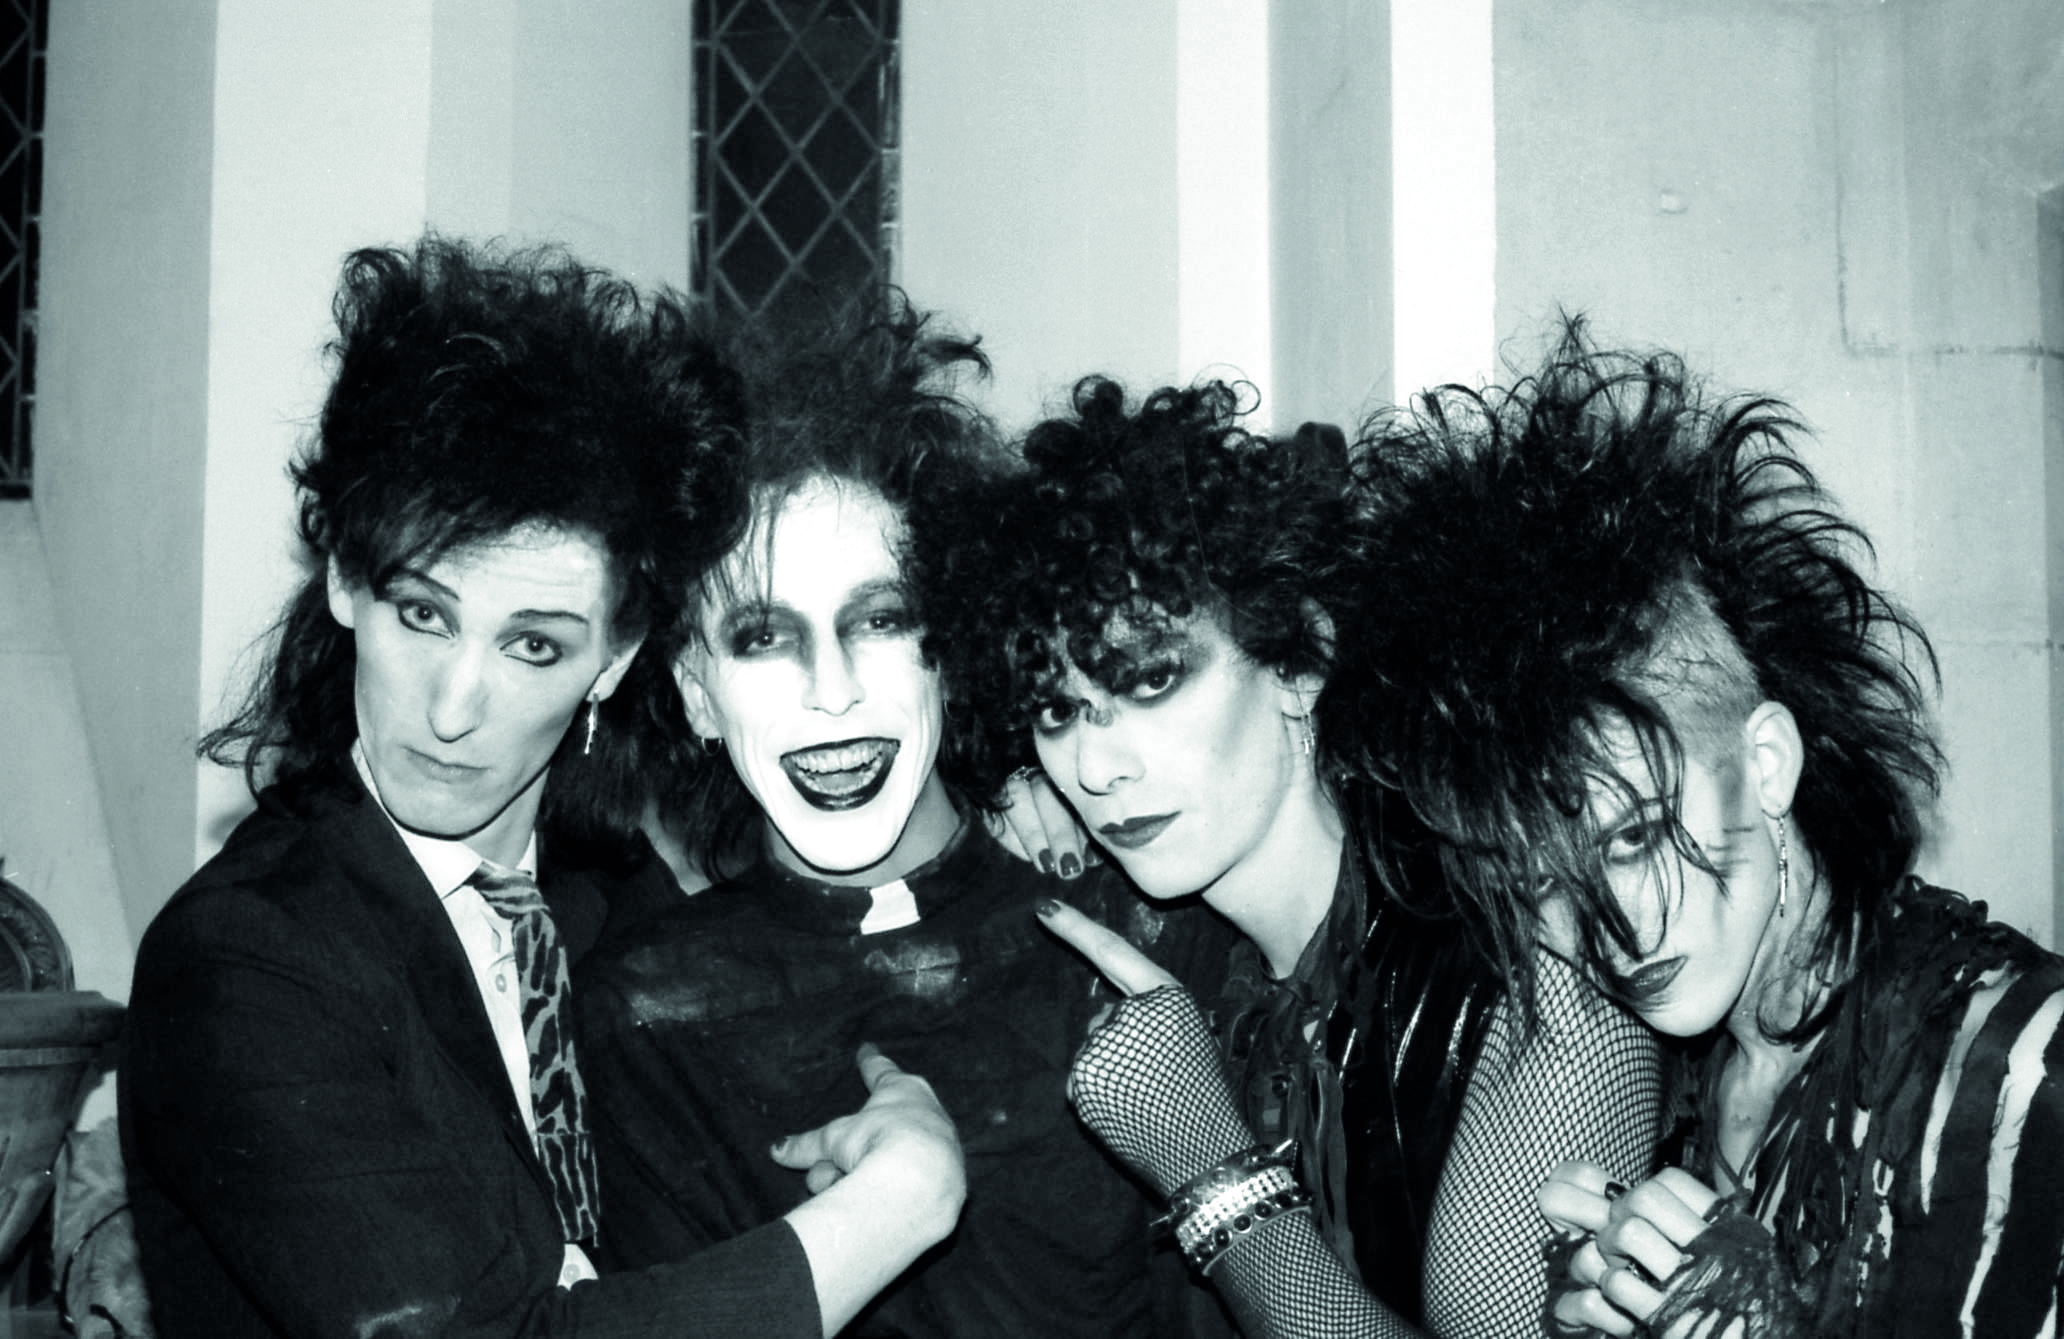 four goth friends with wild hair and dark makeup pose for a photo